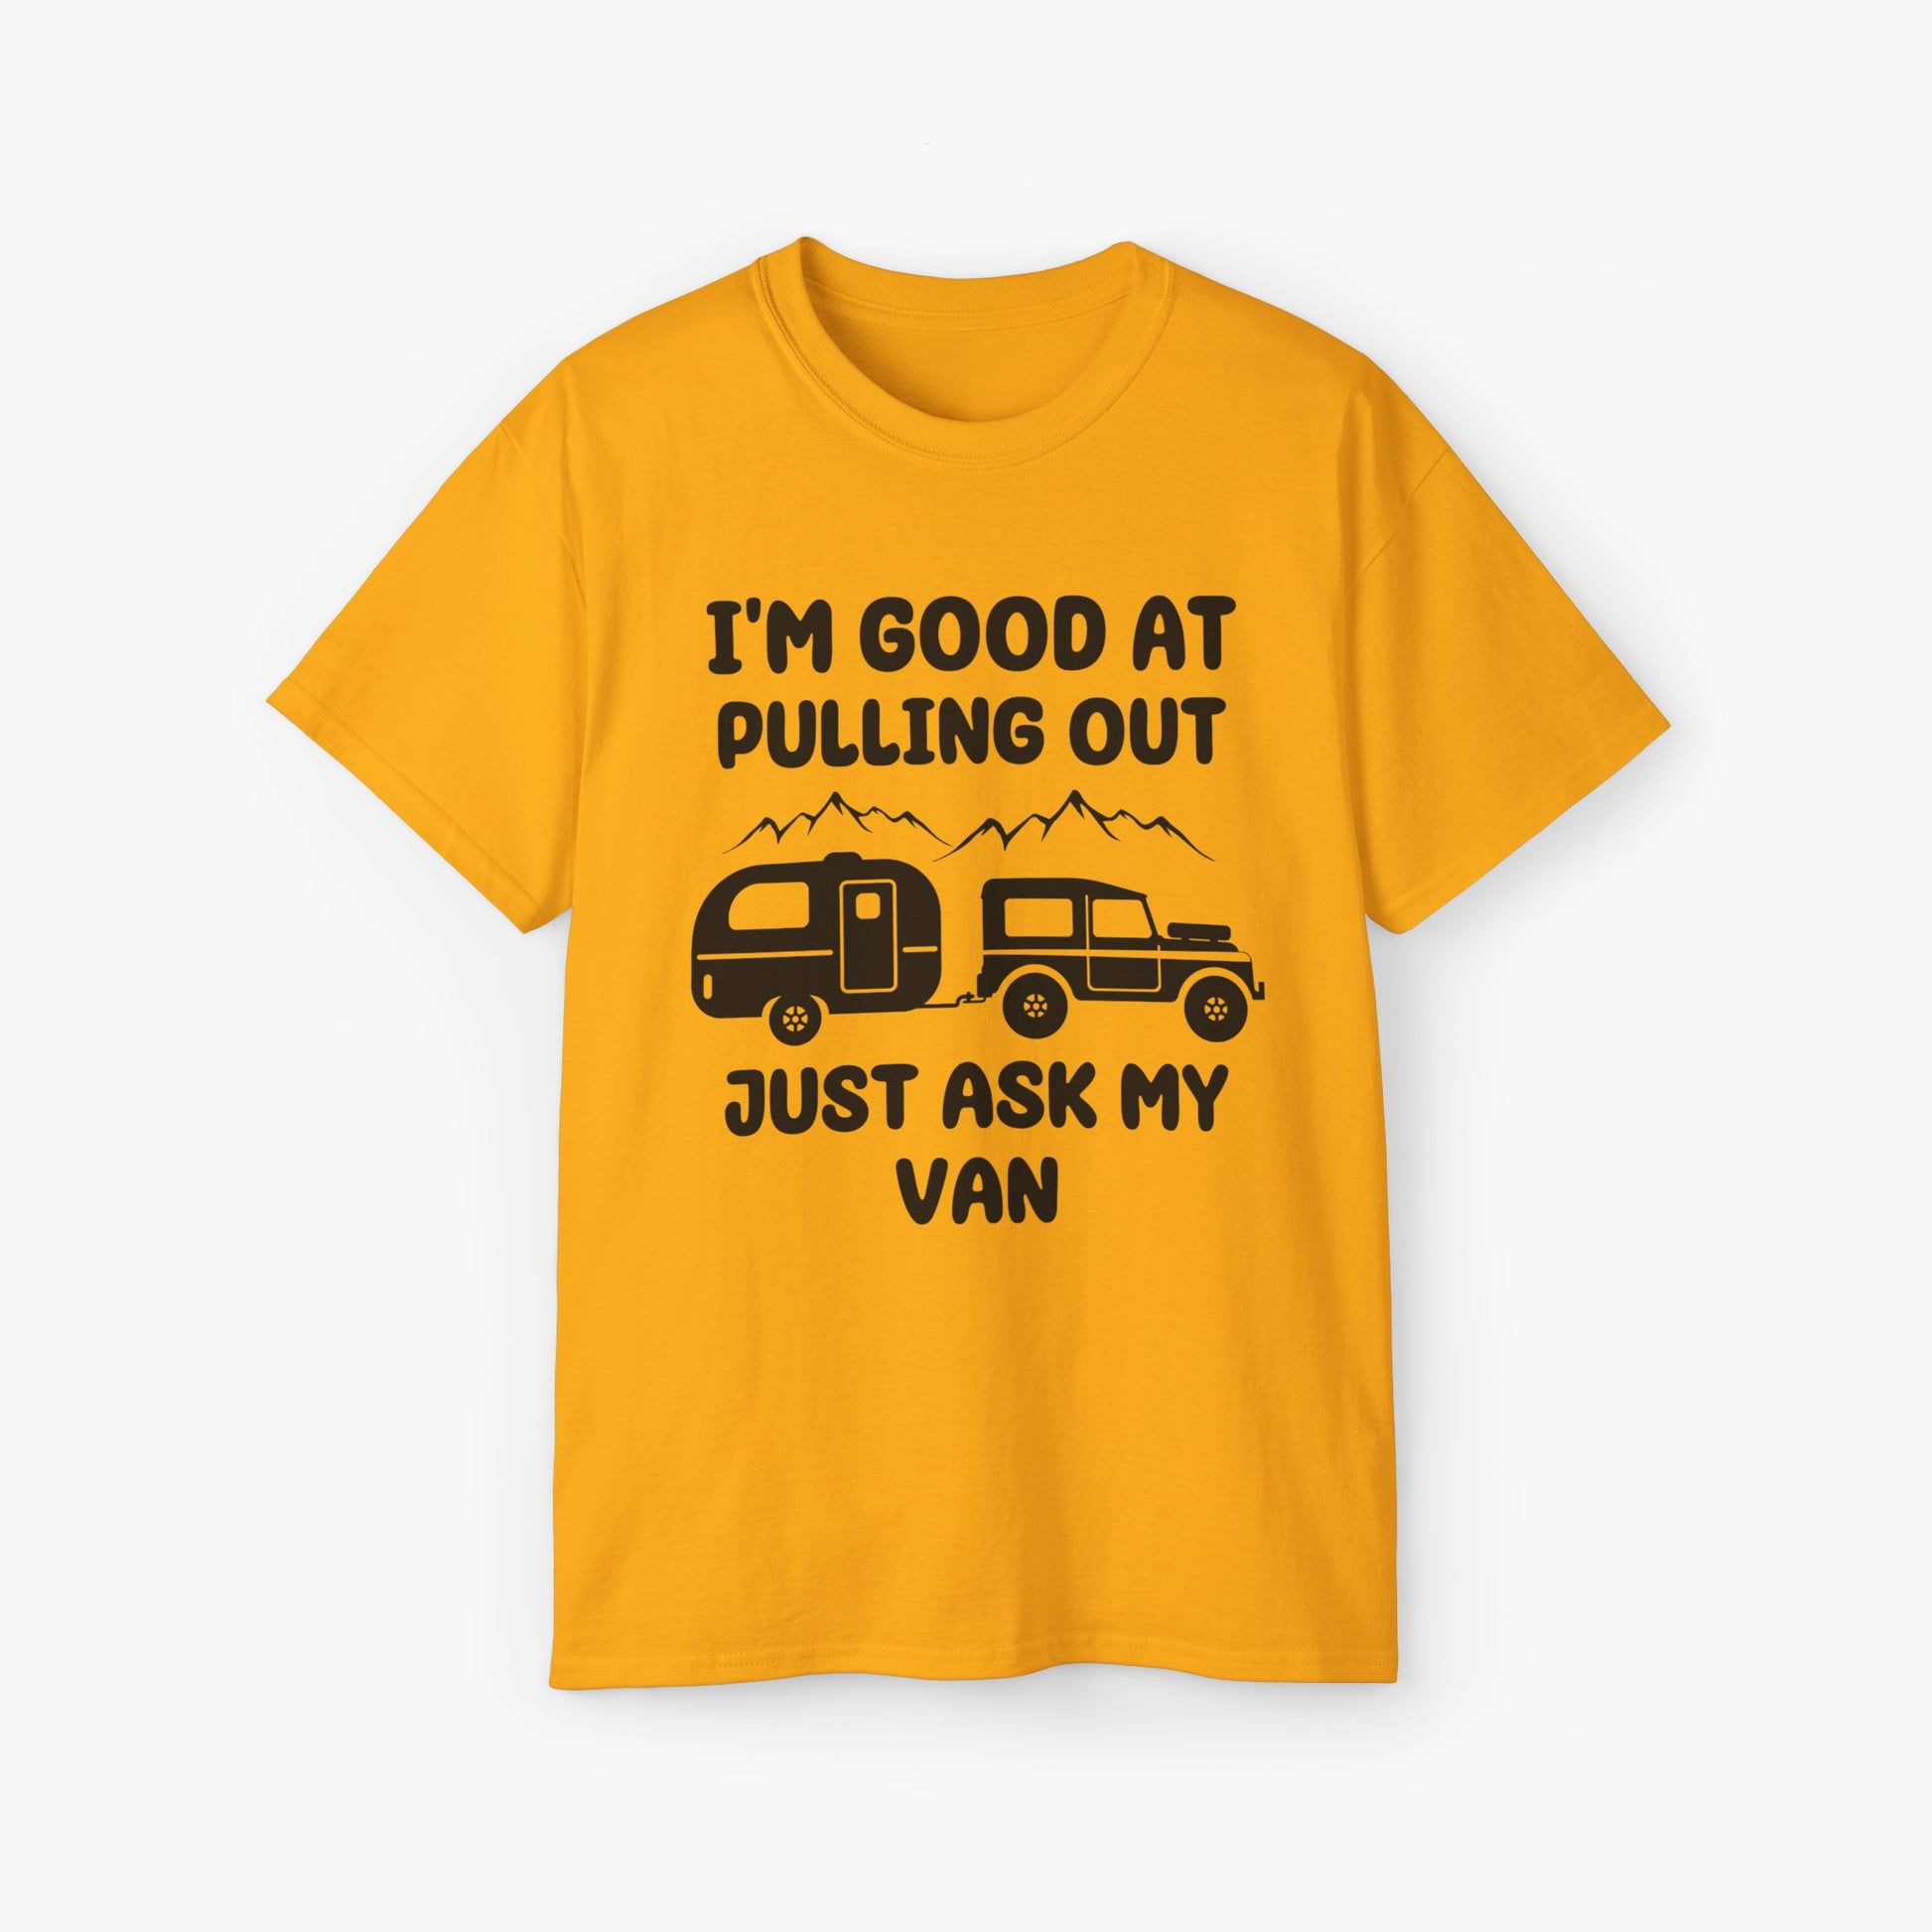 Yellow t-shirt with humorous text 'I'm good at pulling out, just ask my van,' featuring an image of a truck pulling a camping van, set against mountains on a plain background.